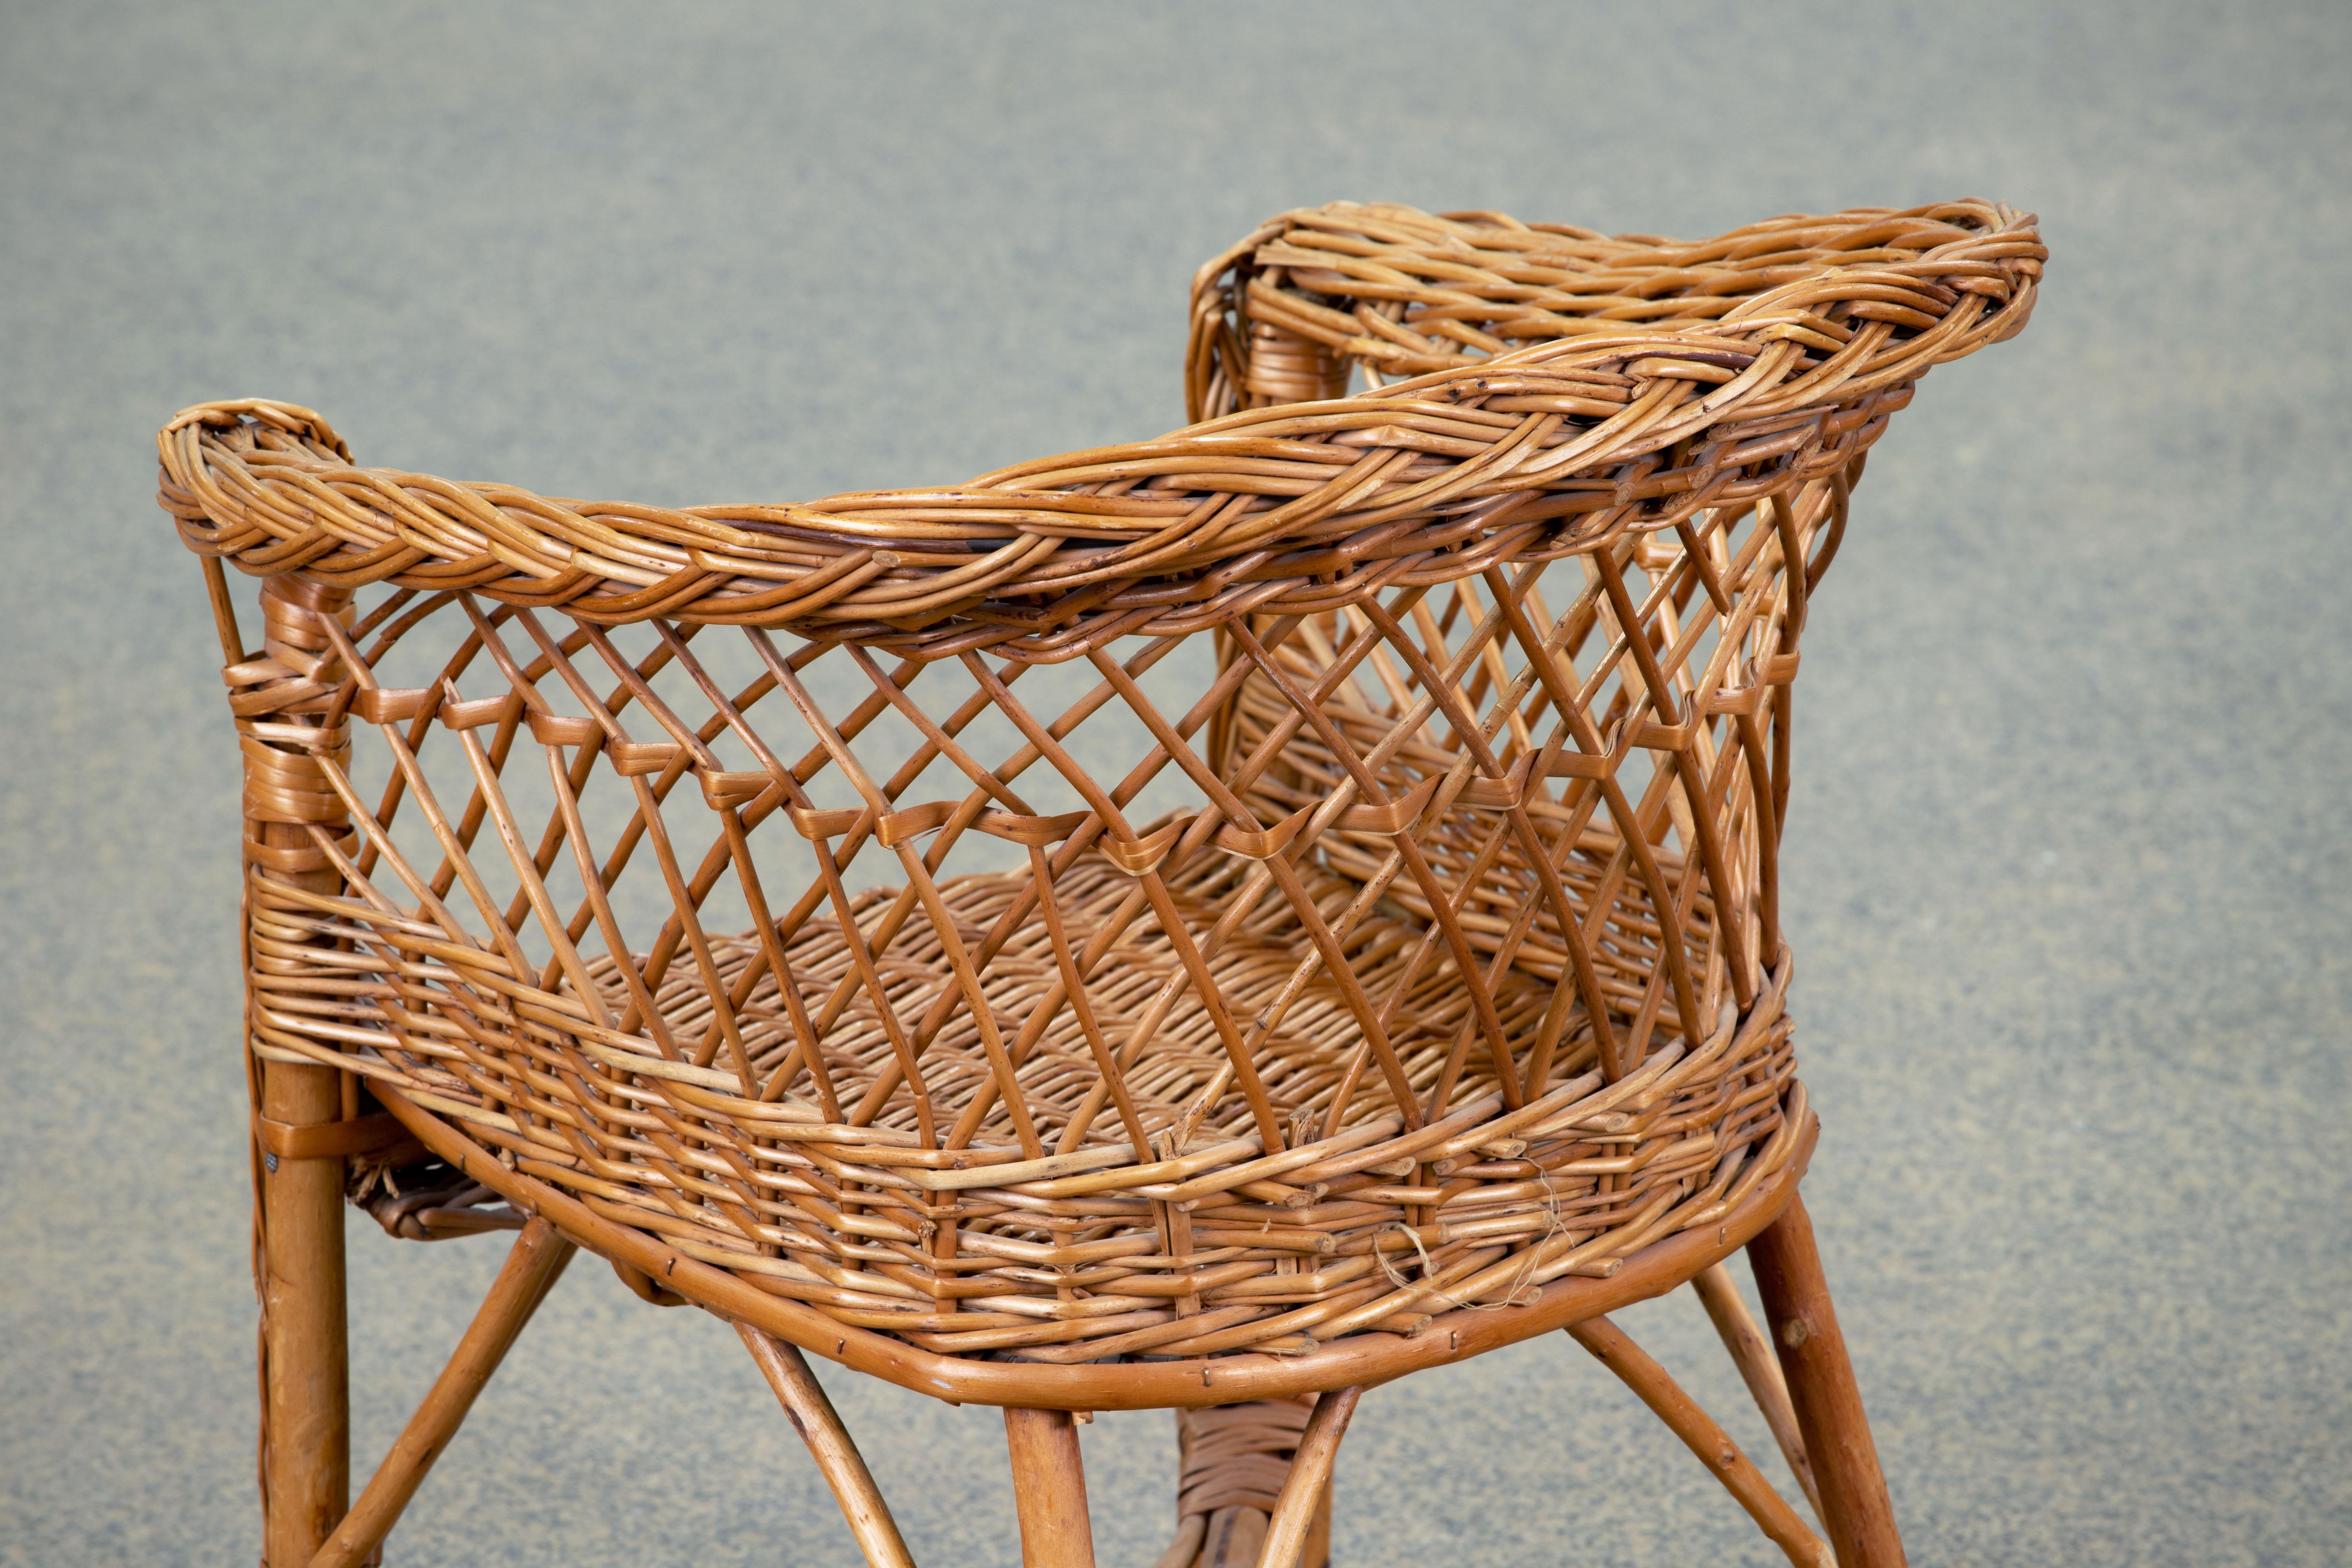 Midcentury Organic Kid Rattan Chair, 1970s, France For Sale 3